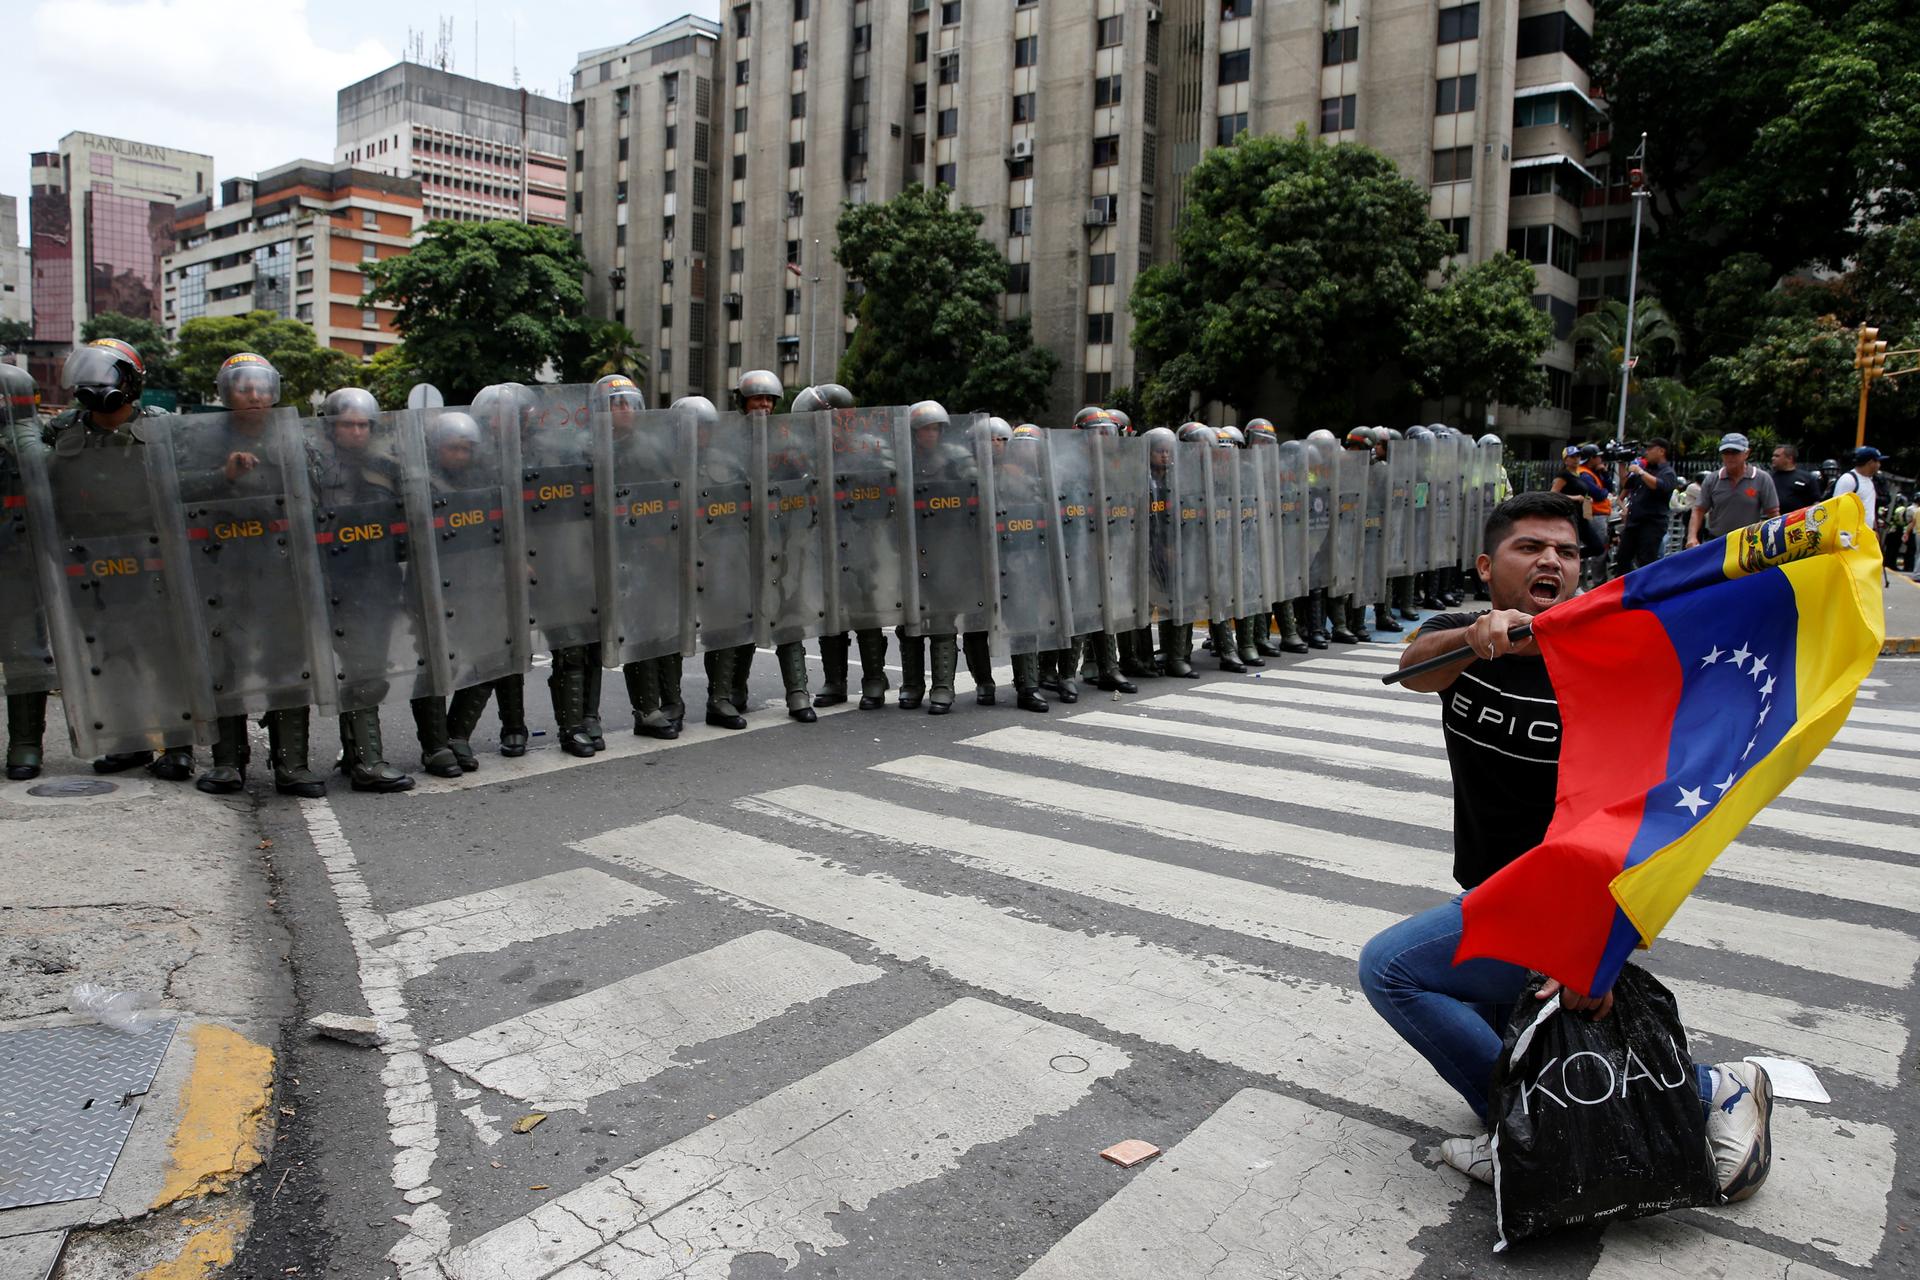 An opposition supporter carrying a Venezuelan flag kneels in front of National Guards during a rally to demand a referendum to remove President Nicolas Maduro in Caracas, Venezuela, May 18, 2016.